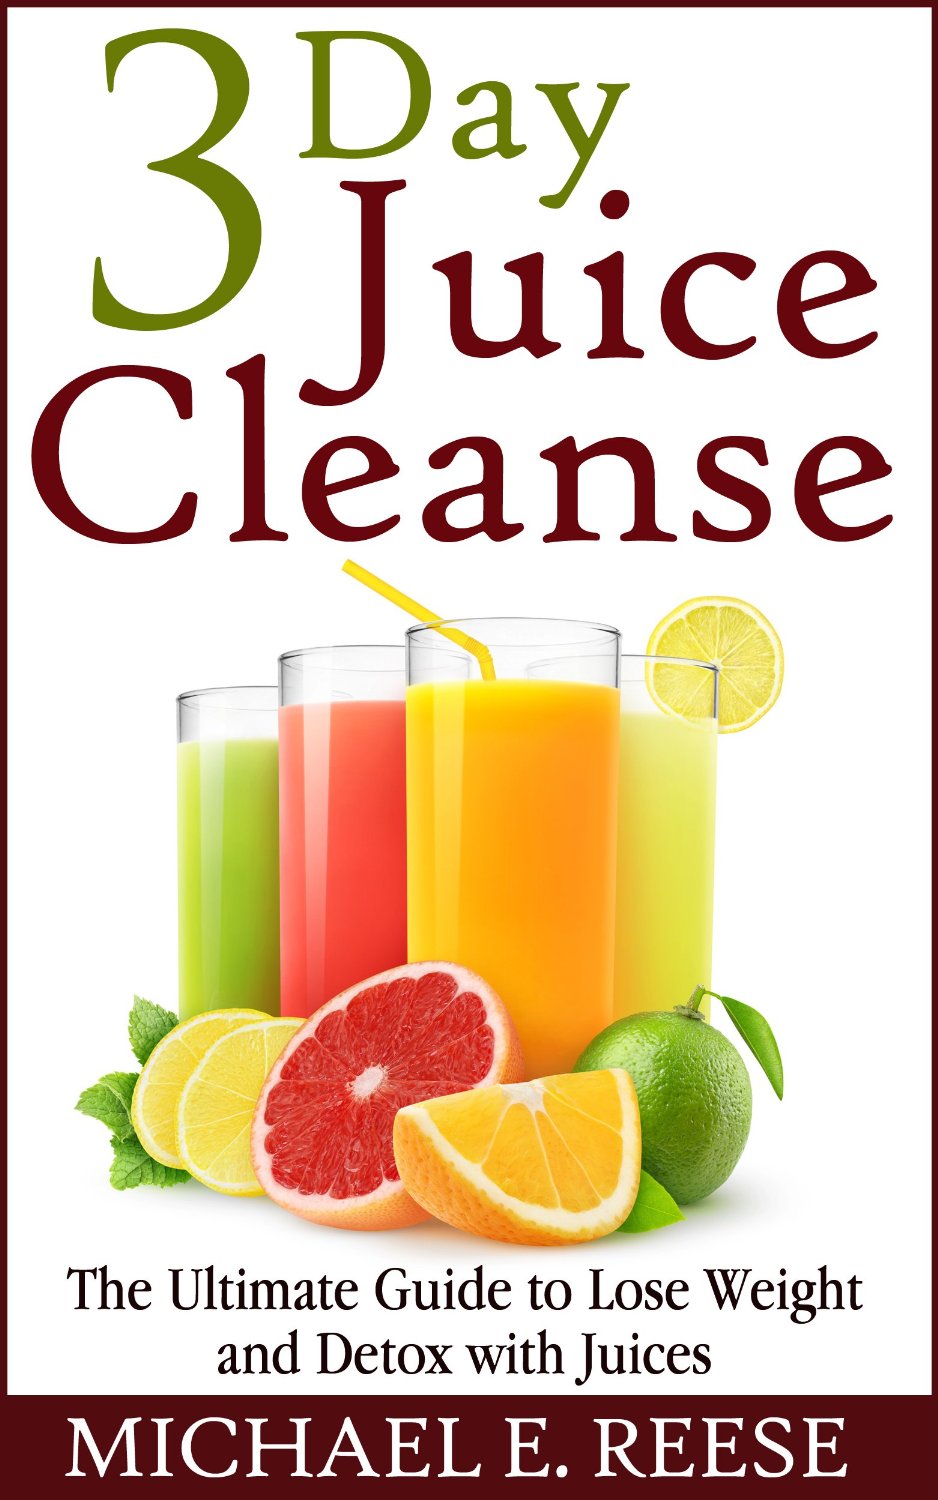 3 Day Juice Cleanse: The Ultimate Guide to Lose Weight and Detox with Juices by Michael E. Reese